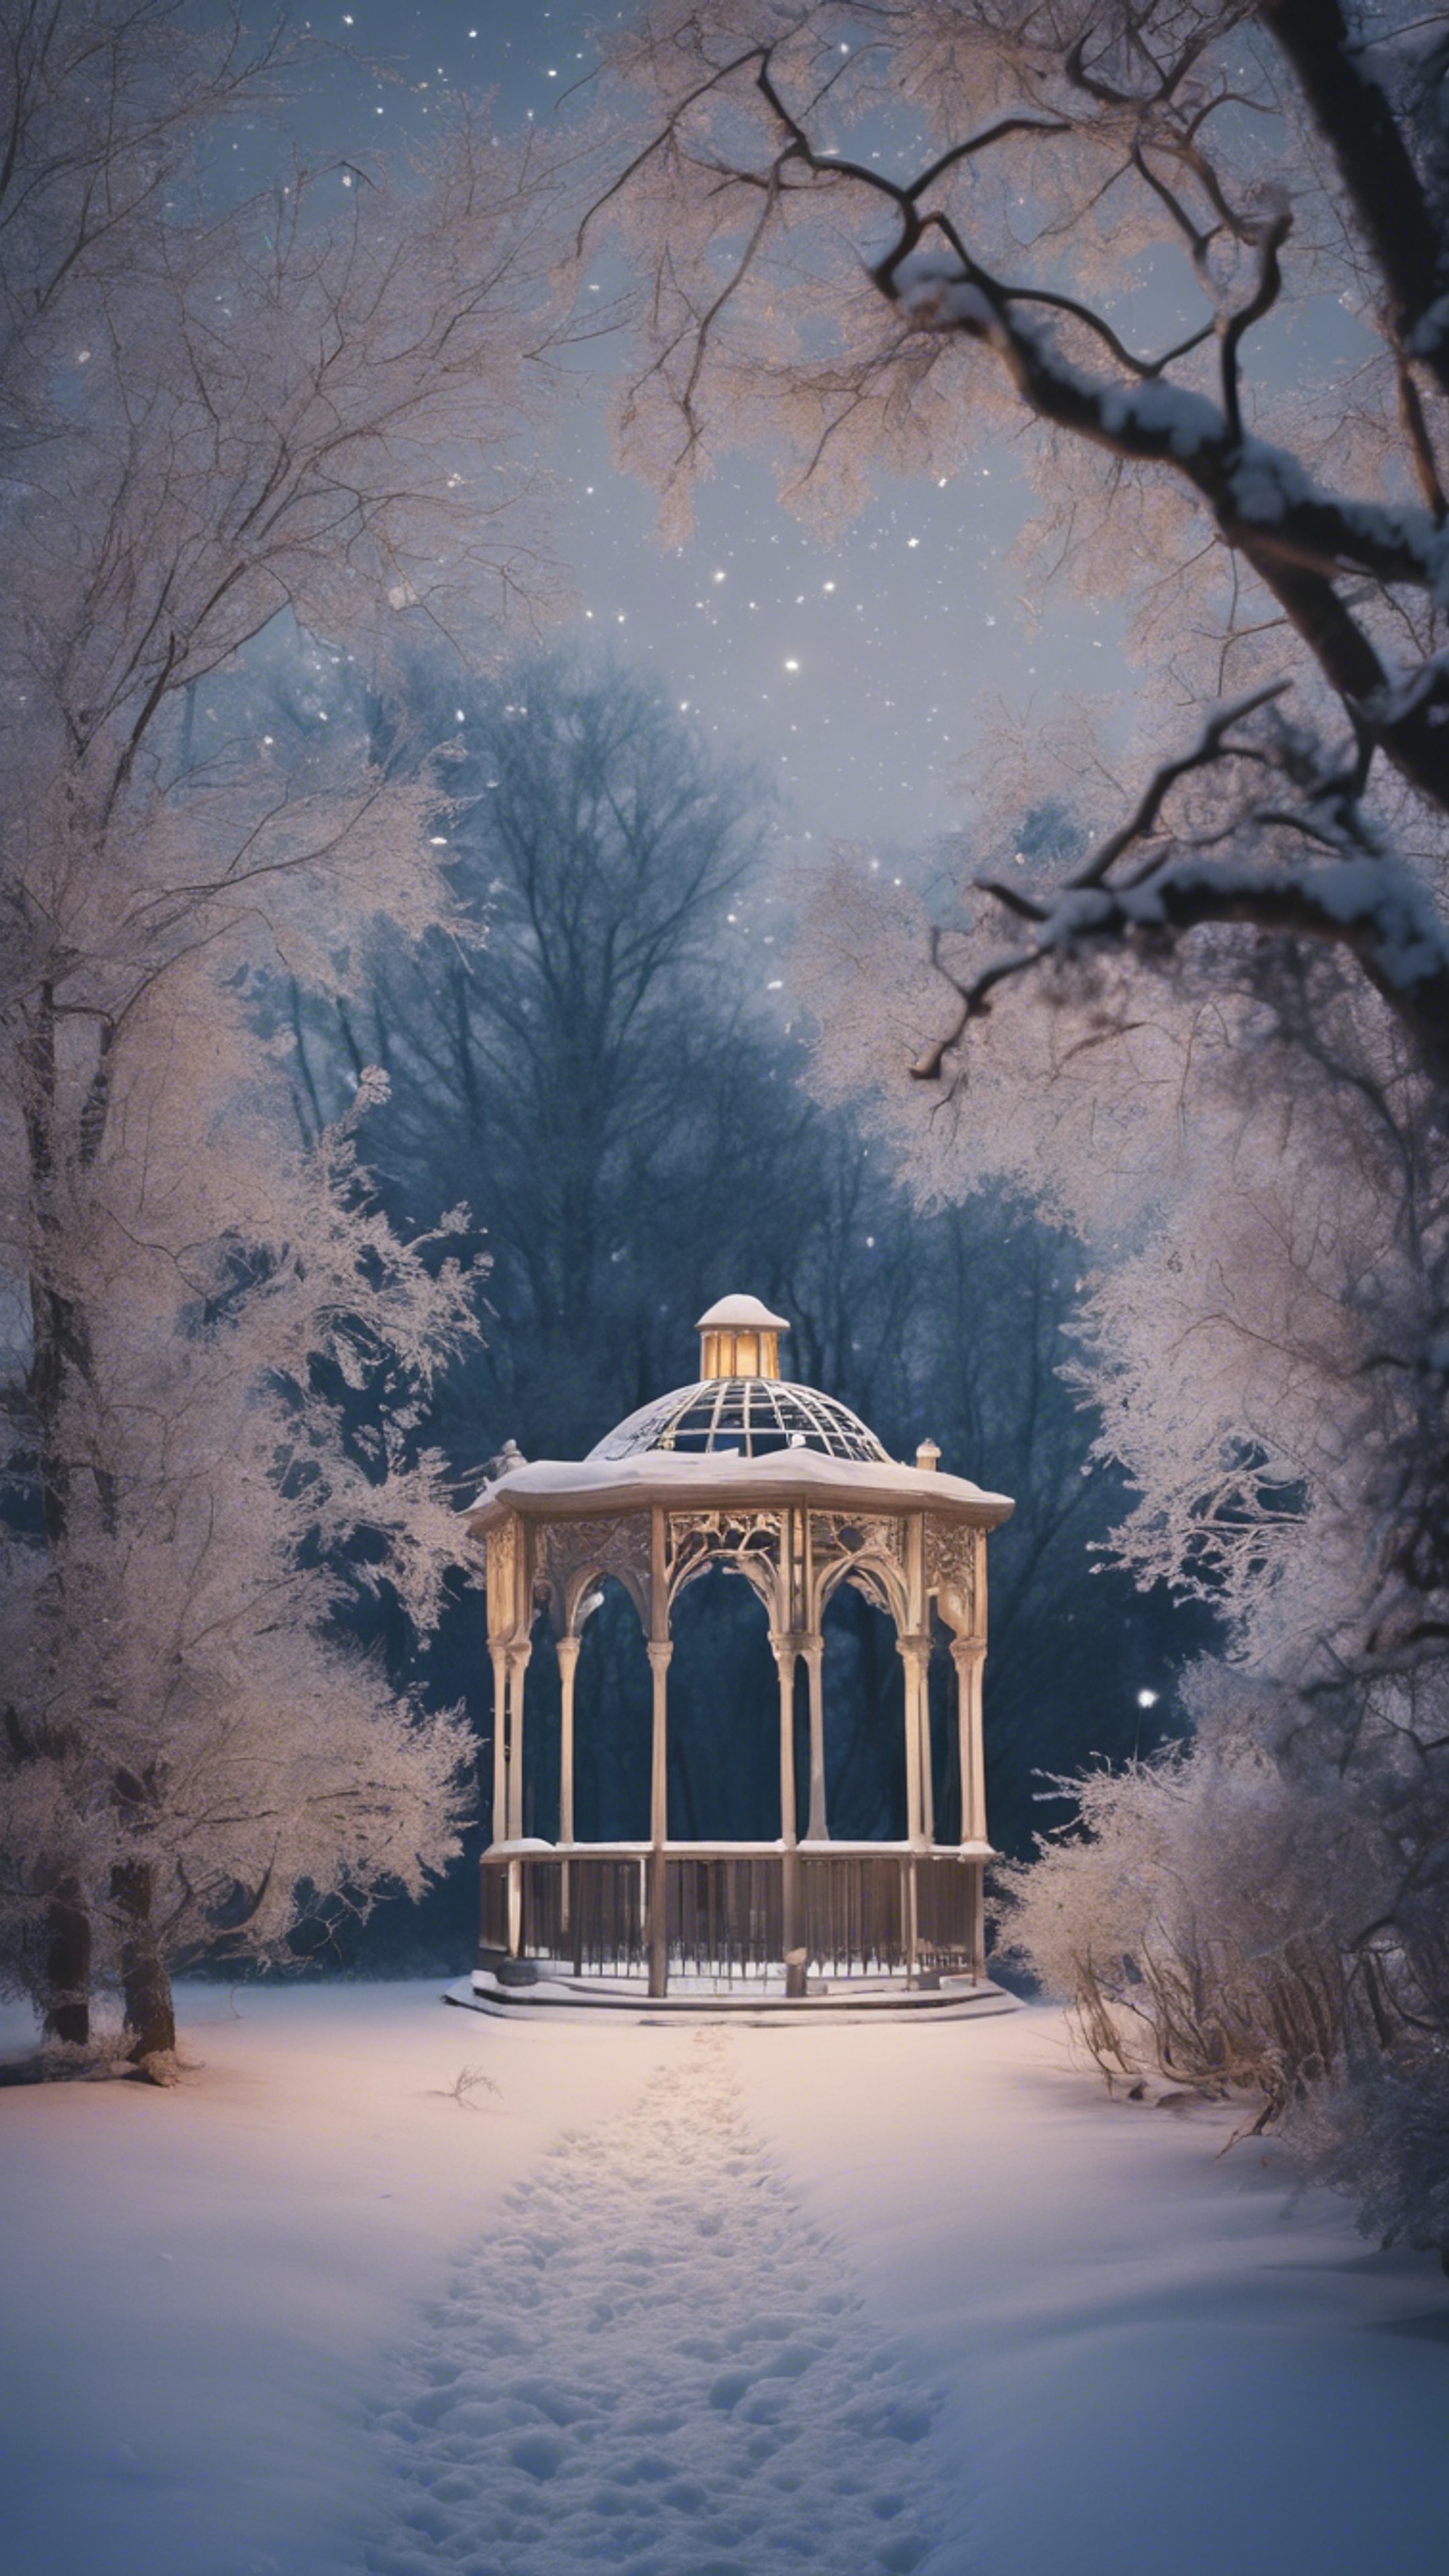 A hauntingly beautiful garden draped in winter's first frost under a star-studded night, everything tranquil and silent. Wallpaper[23a5b39d52cf4fe08681]